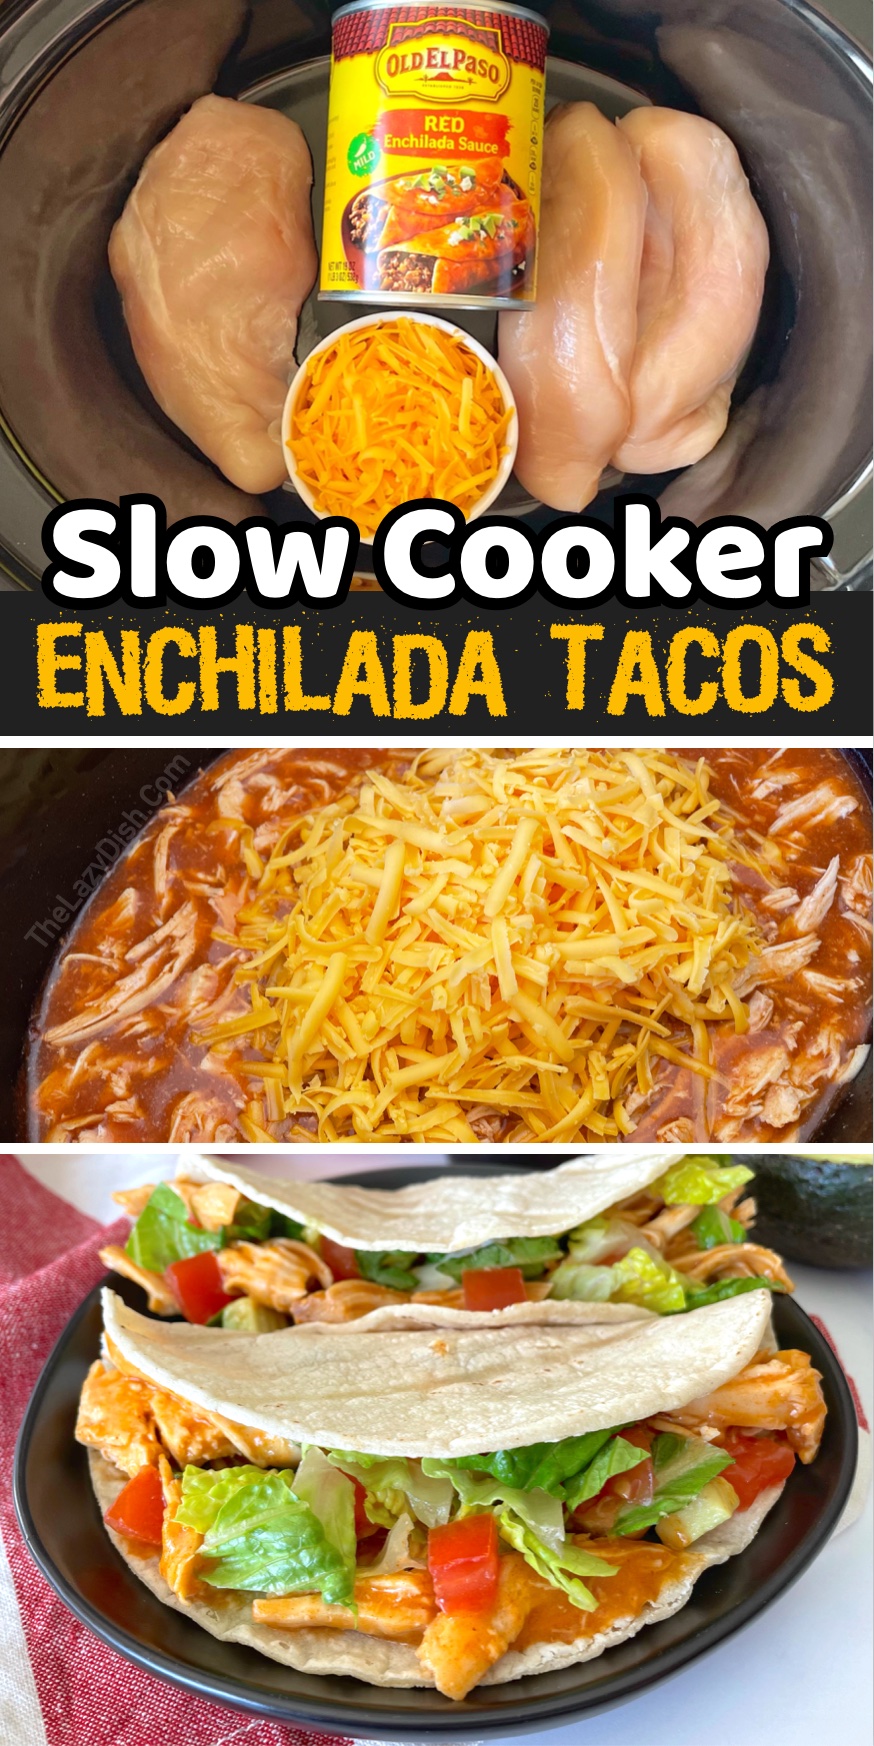 These slow cooker enchilada tacos are perfect for a family with kids! The base recipe is mild and you can adjust it to your own taste. Just 3 basic ingredients: chicken breasts, a can of enchilada sauce, and cheese! We like to serve the creamy shredded chicken in tortillas with fresh produce like lettuce and tomatoes, but it's also awesome in a burrito bowl or to make nachos. 